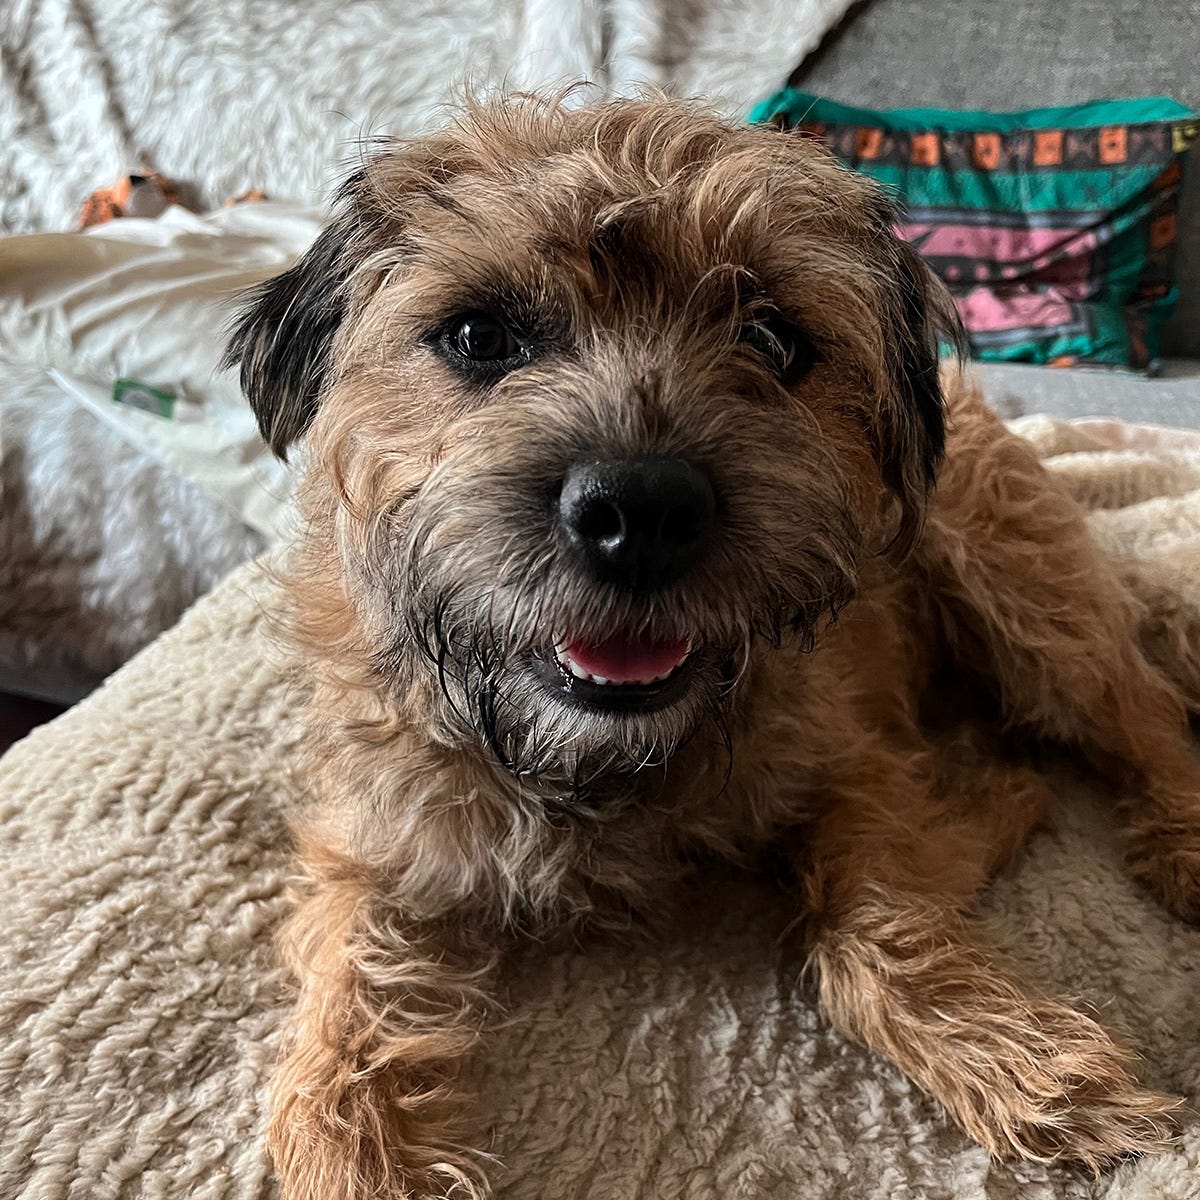 Lucy the Border Terrier lies on a couch covered with fluffy throw blankets. She’s a small dog with shaggy, light brown fur. She has bright dark eyes and dark brown fur on her muzzle and ears. She is panting lightly, which makes her look like she’s smiling.